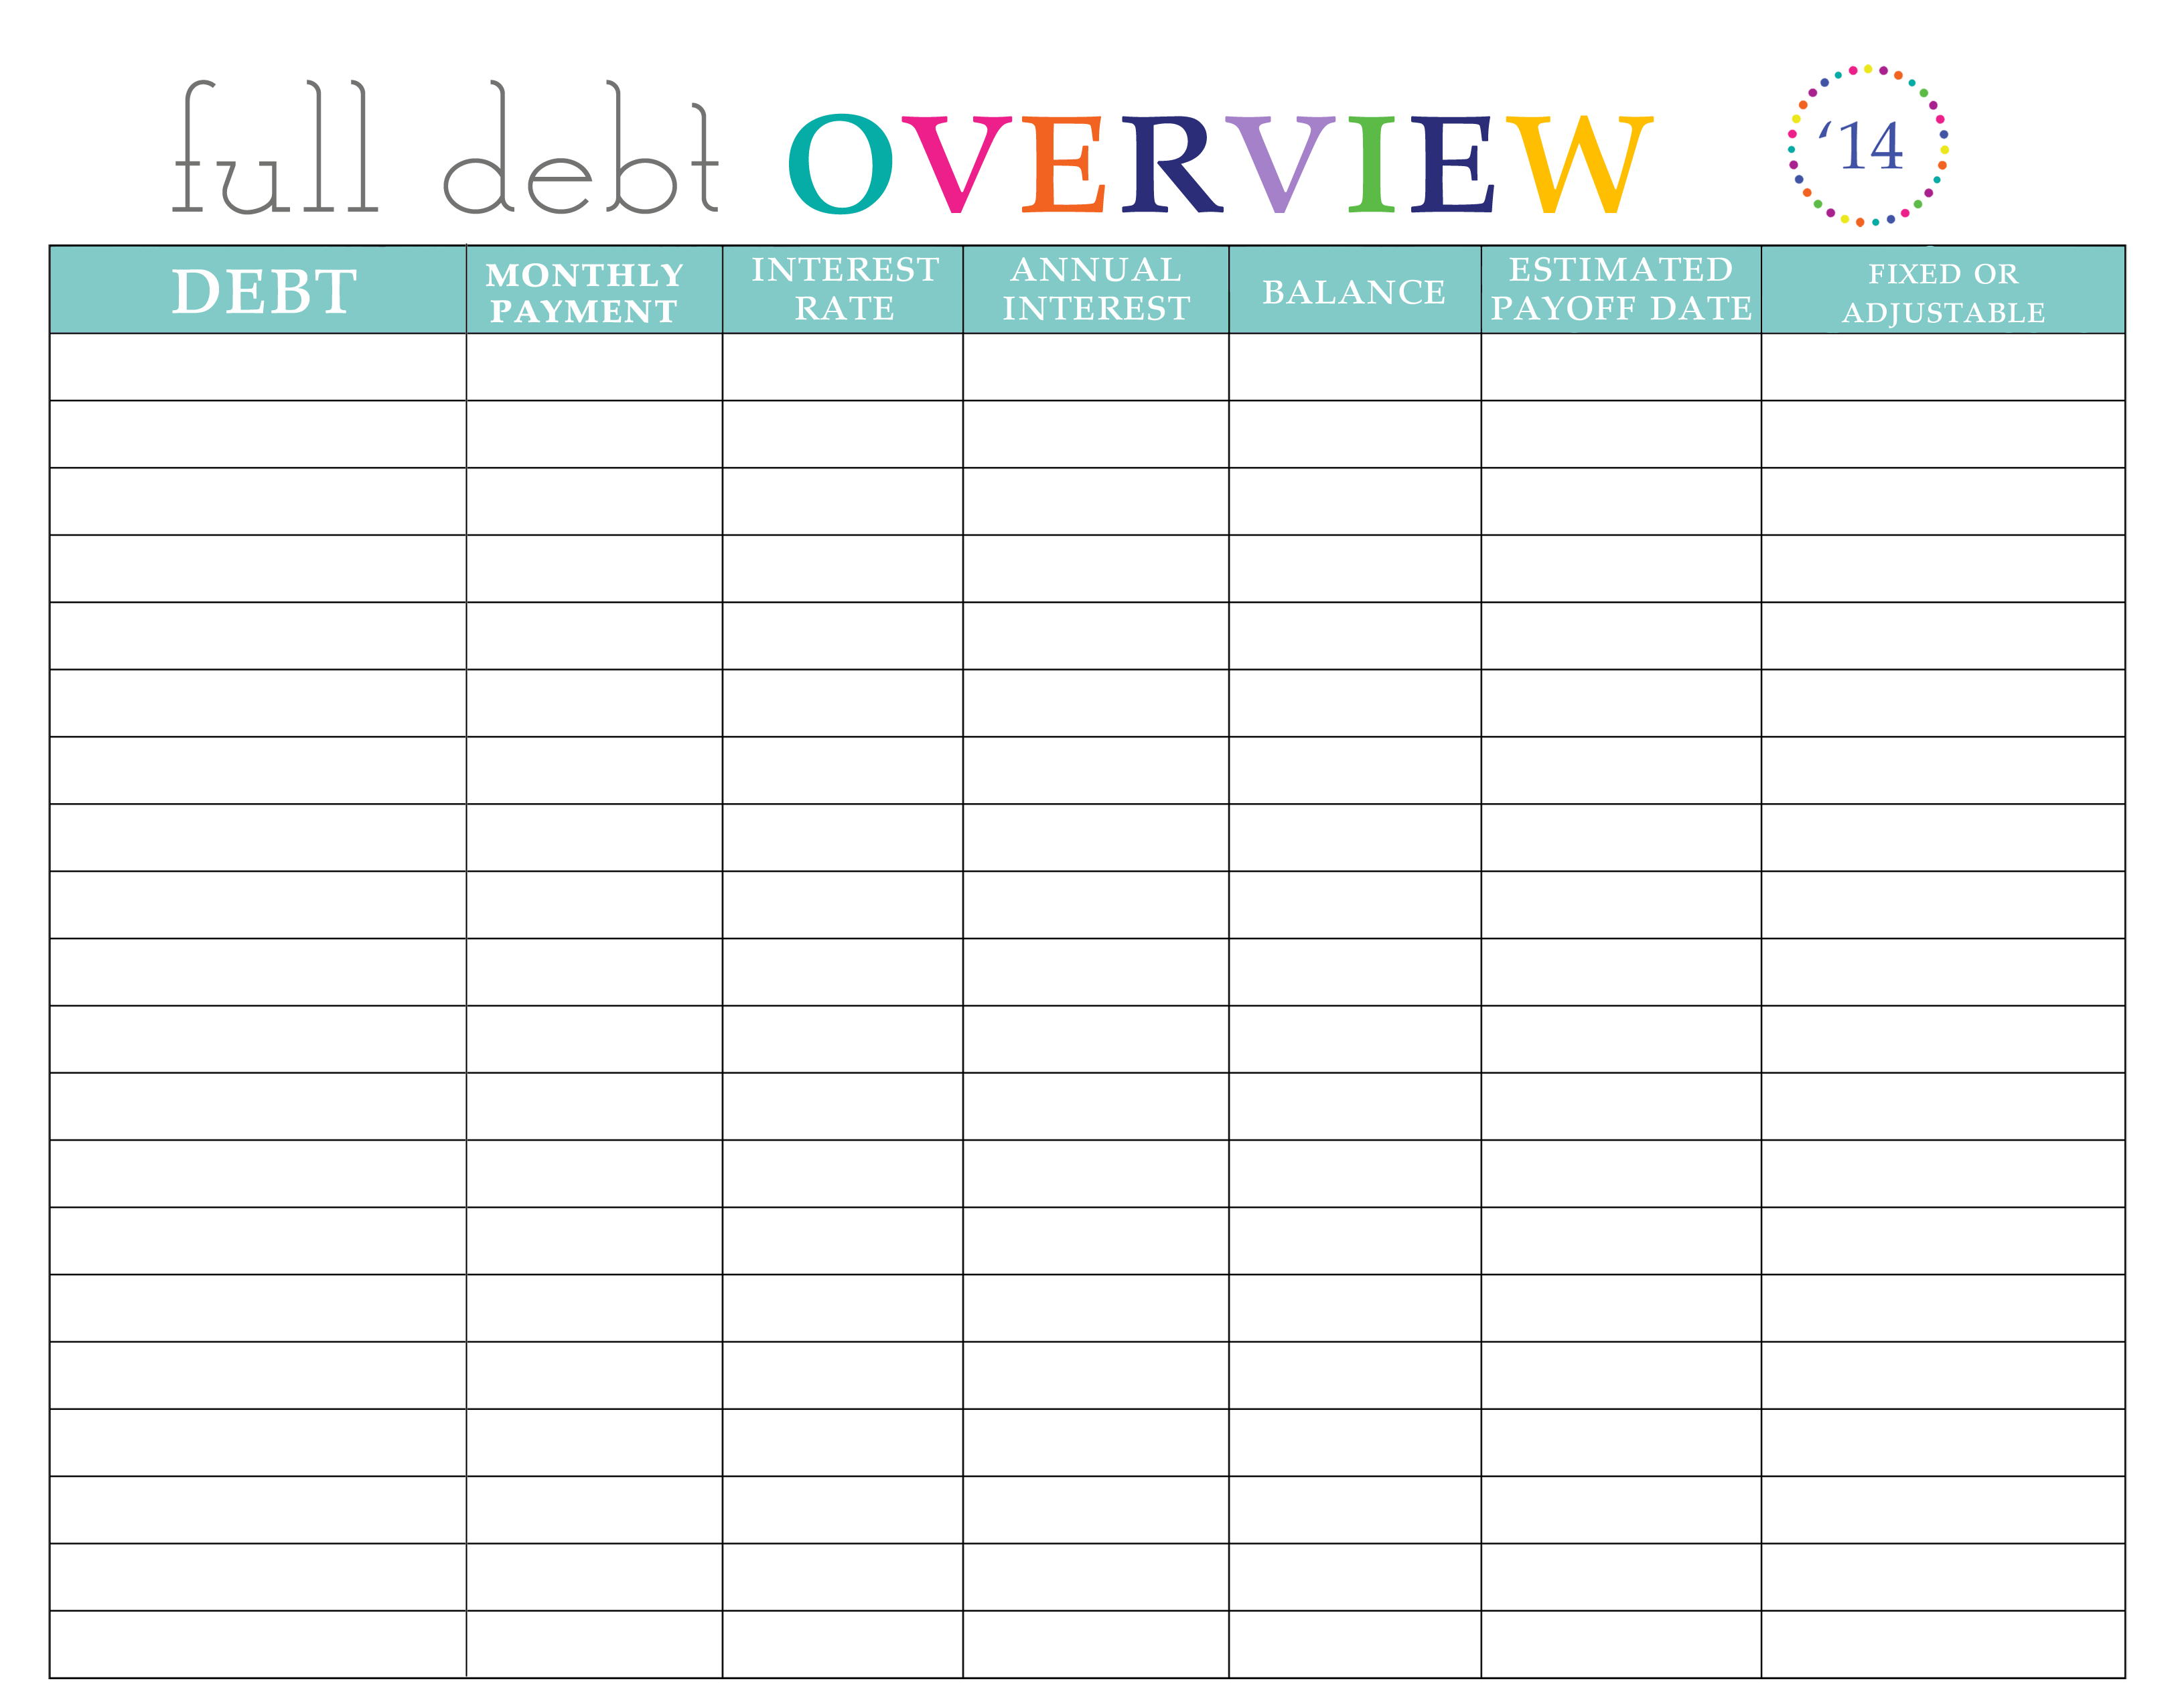 Credit Card Payoff Plan Spreadsheet db excel com